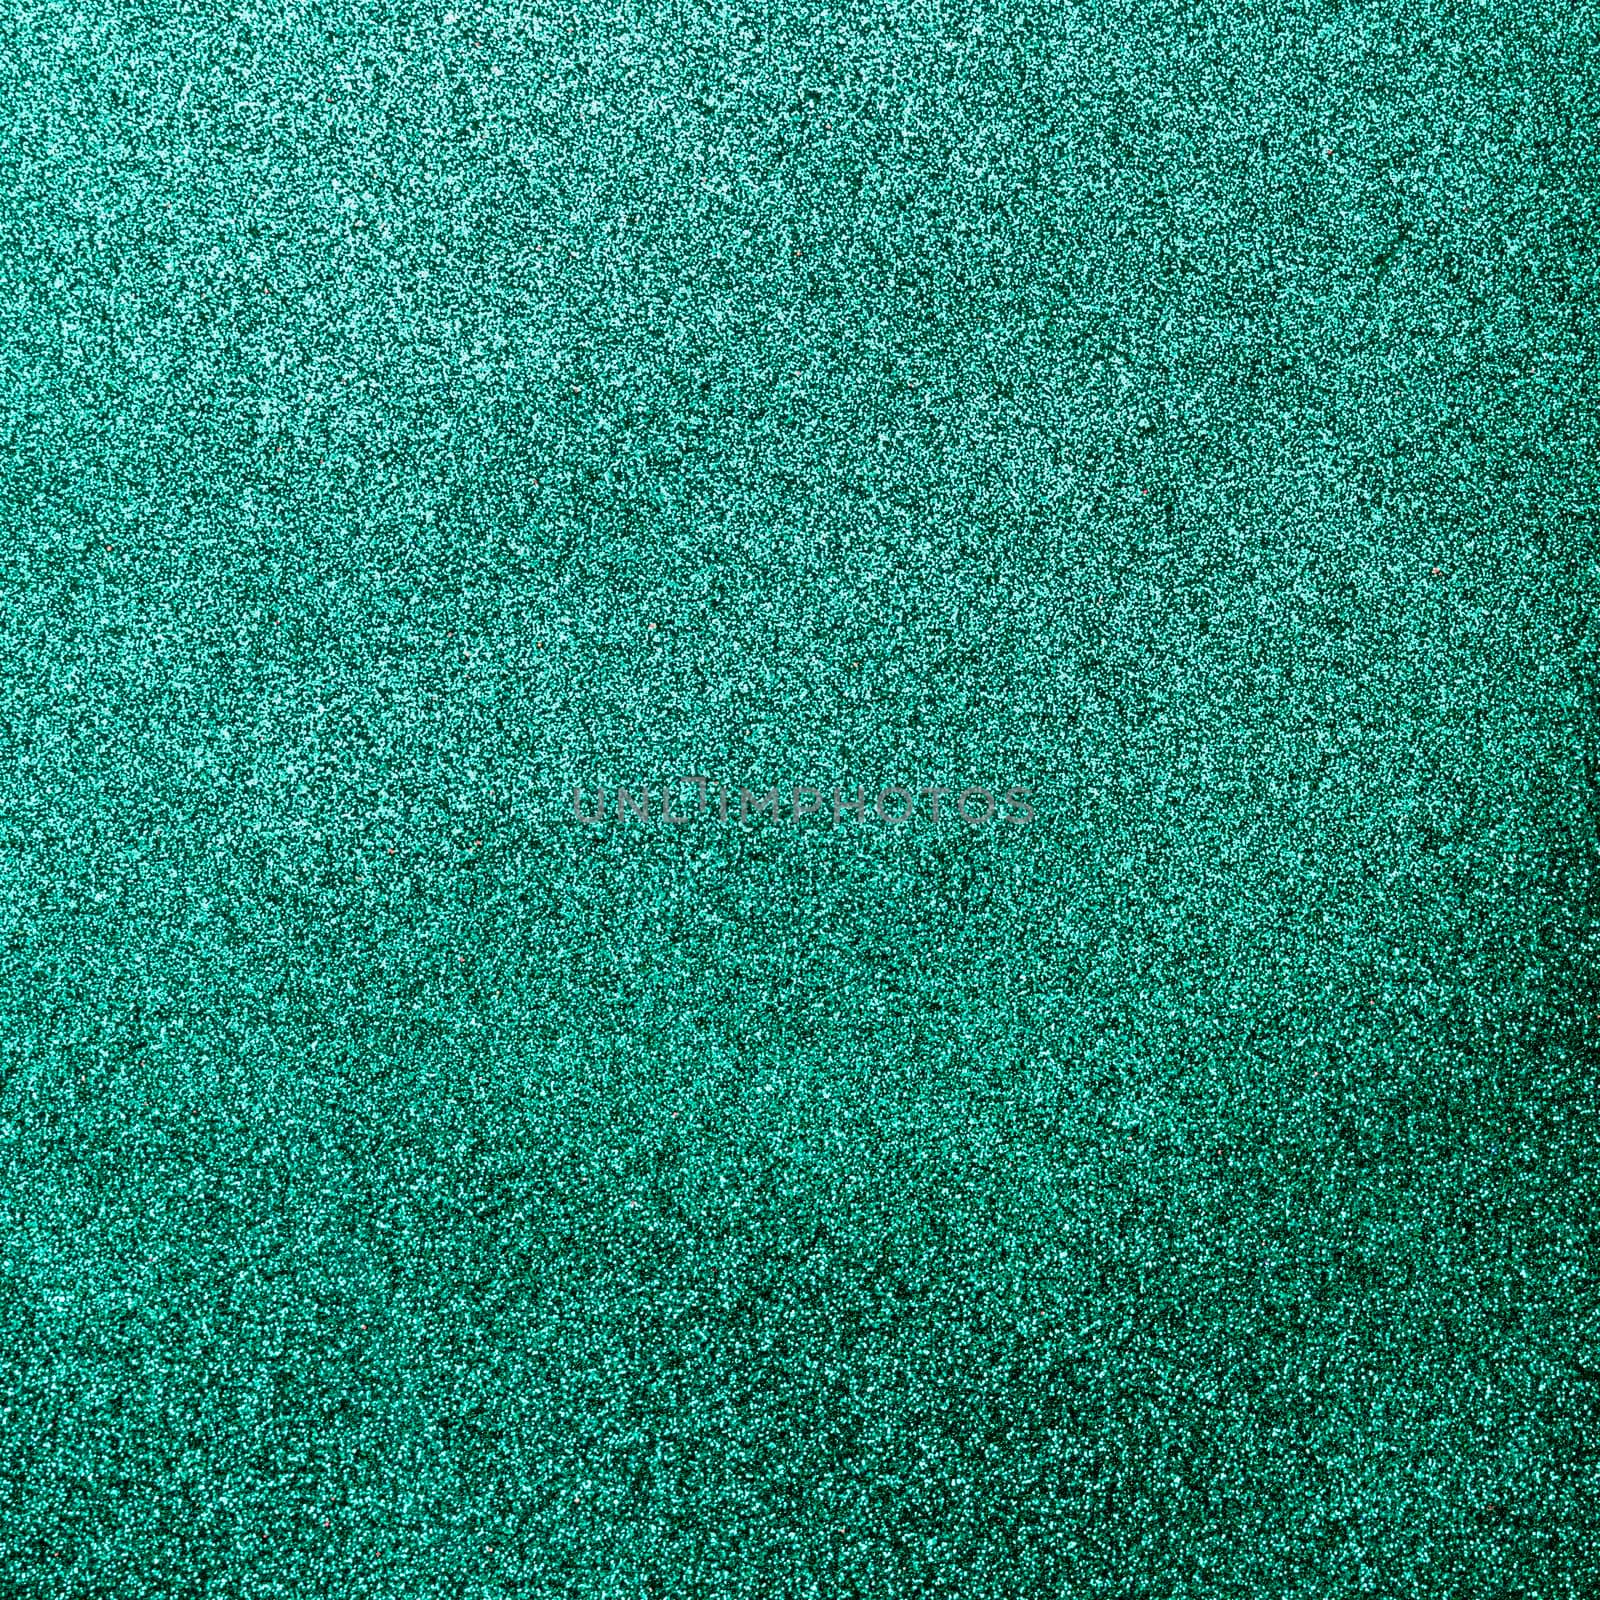 turquoise bedazzling glitter. High quality photo by Zahard